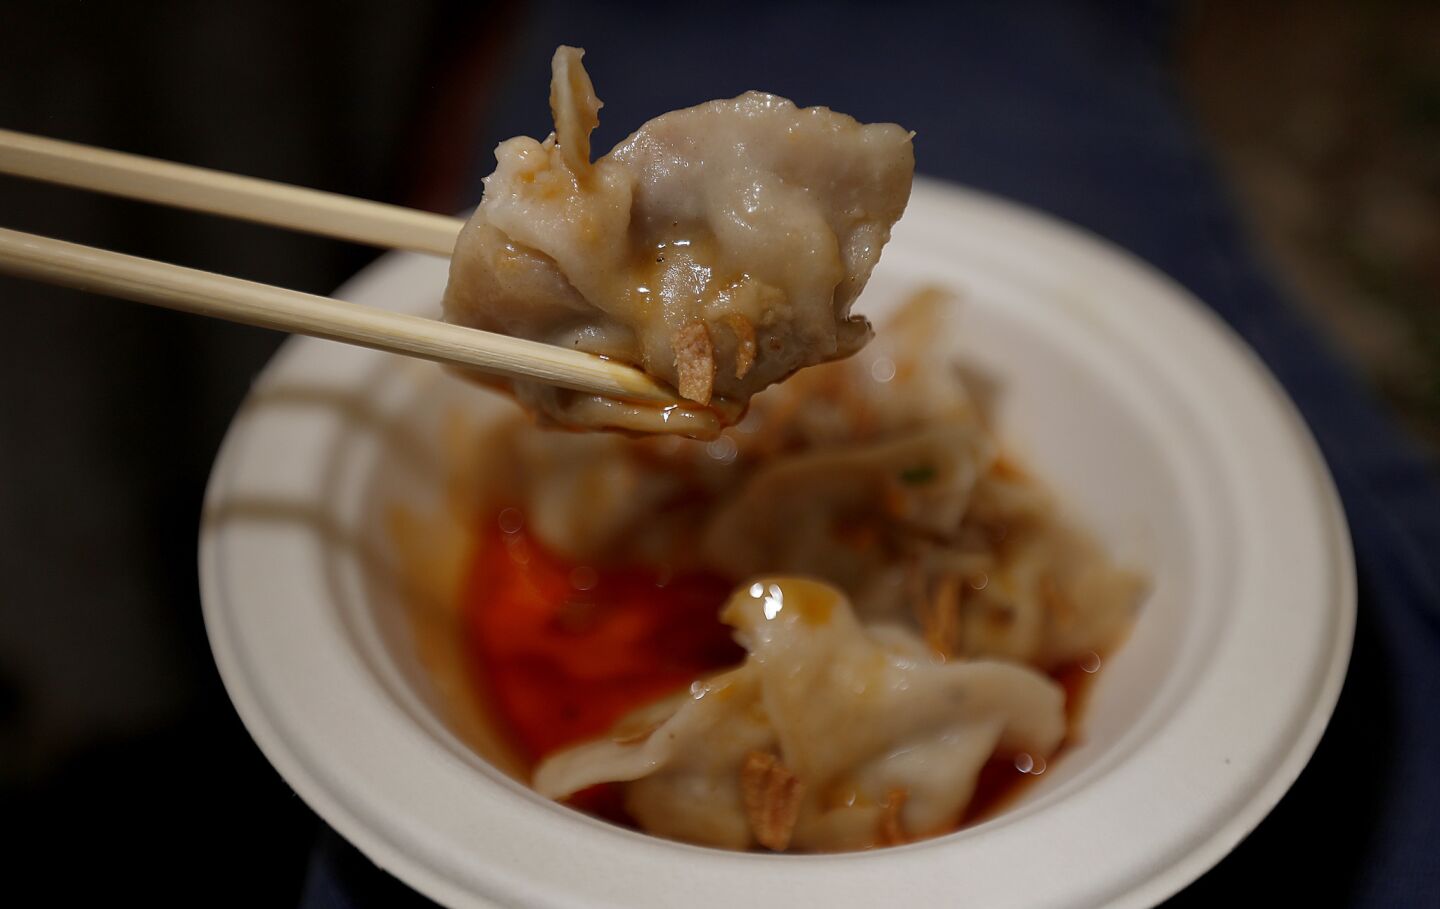 There's more than burgers and beer at Coachella. Try the chicken dumplings from Ms Chi.